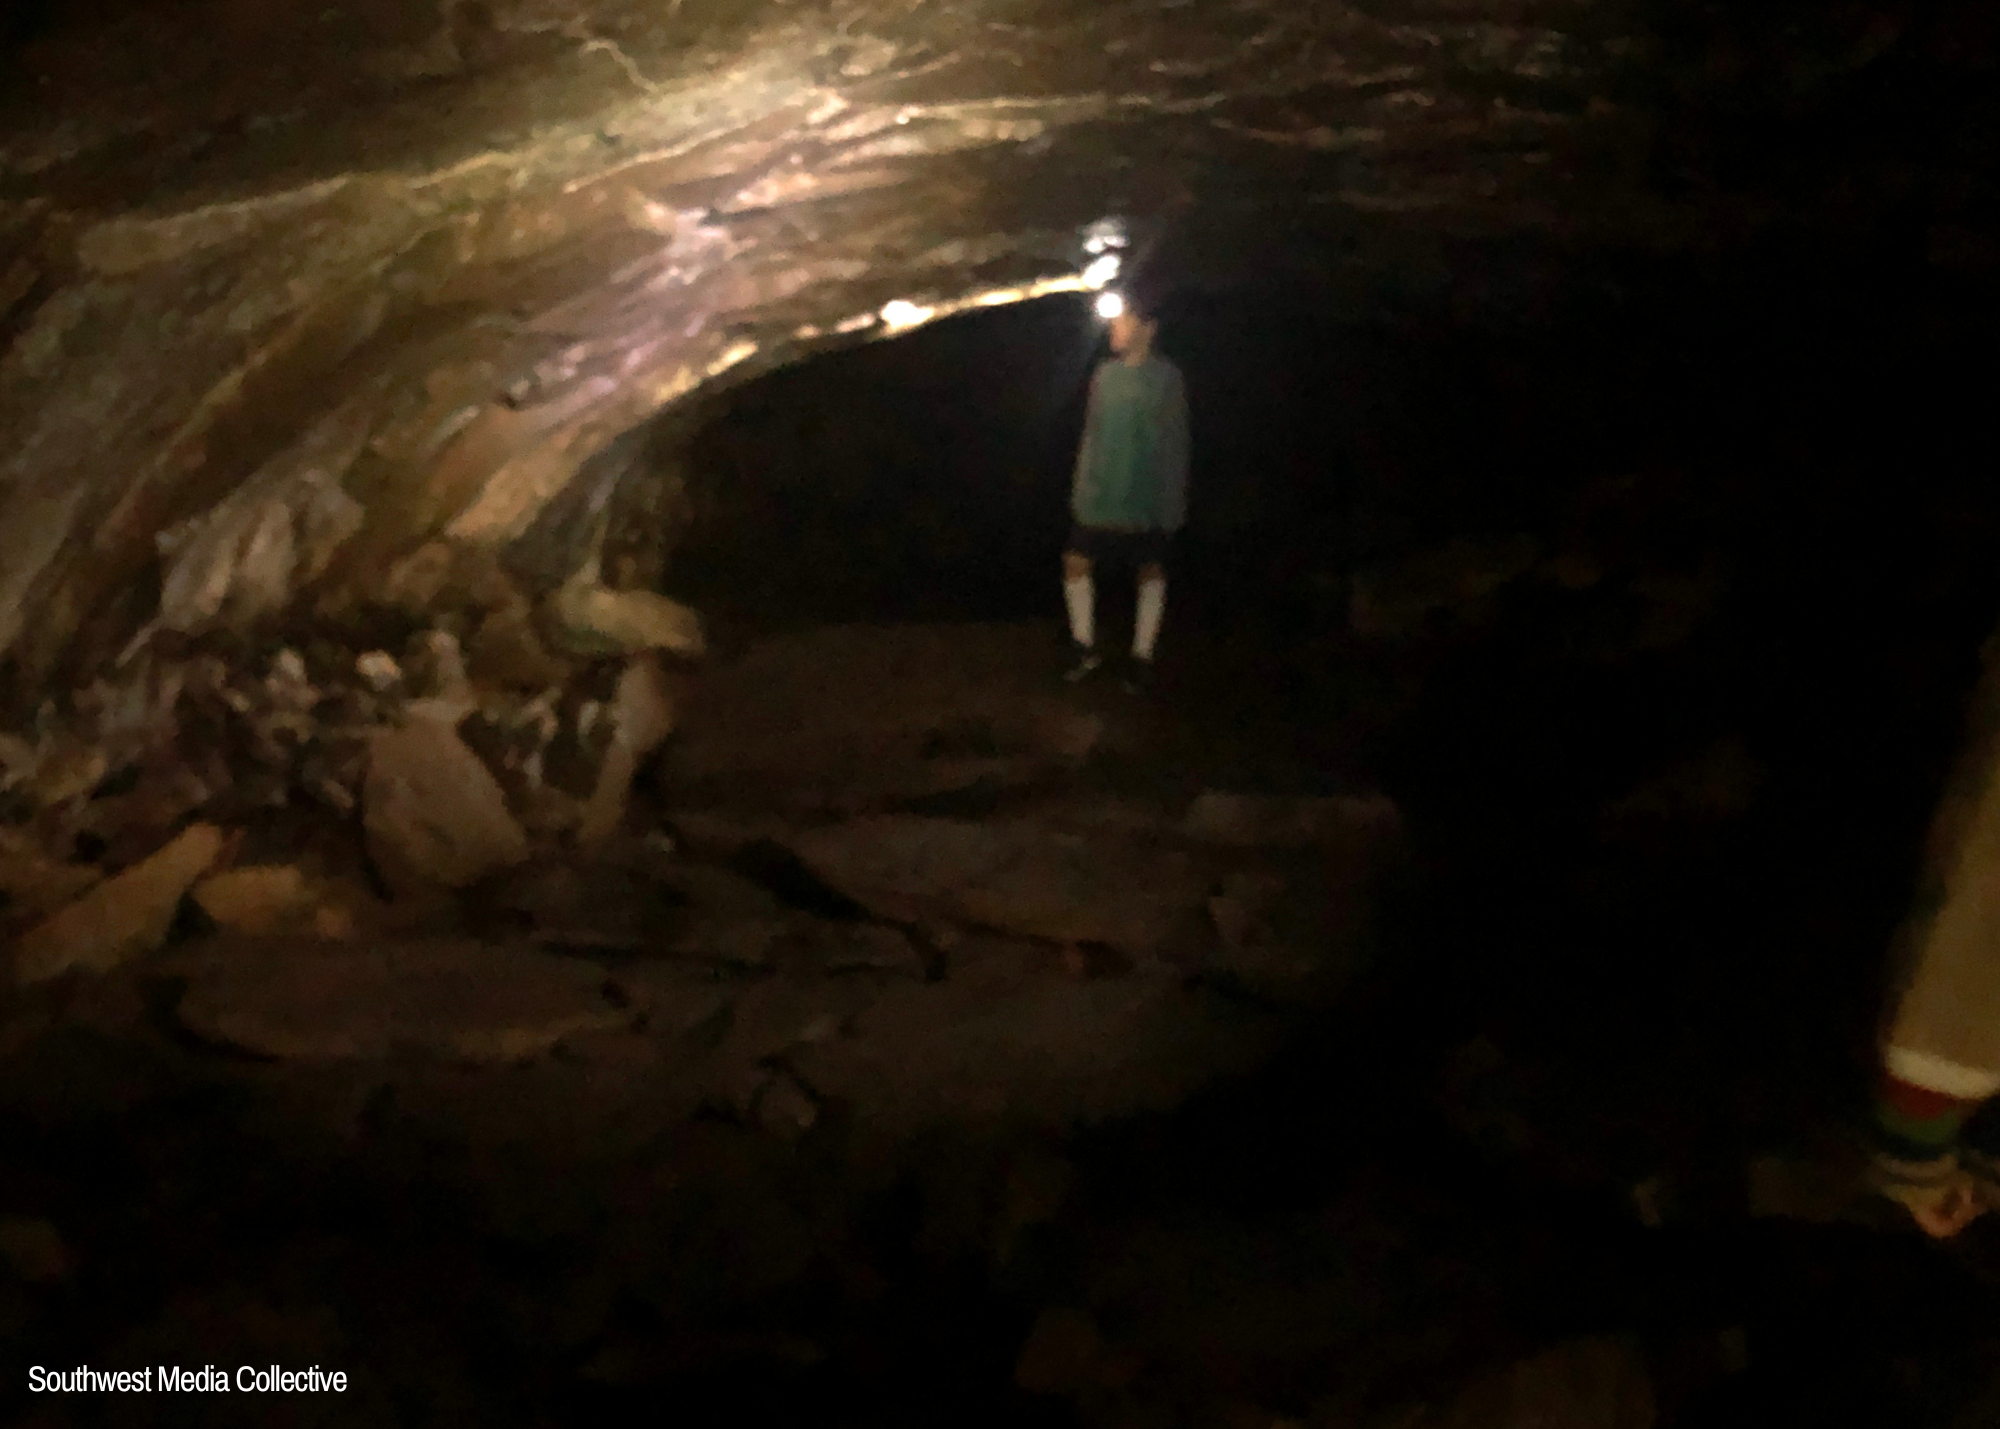 The Lava River Cave is just 30 minutes away from Flagstaff, Arizona. The cave itself was formed 700,000 years ago - at that time, molten lava erupted out of nearby Harts Prairie. The cave was founded in 1915 by lumbermen in the area.